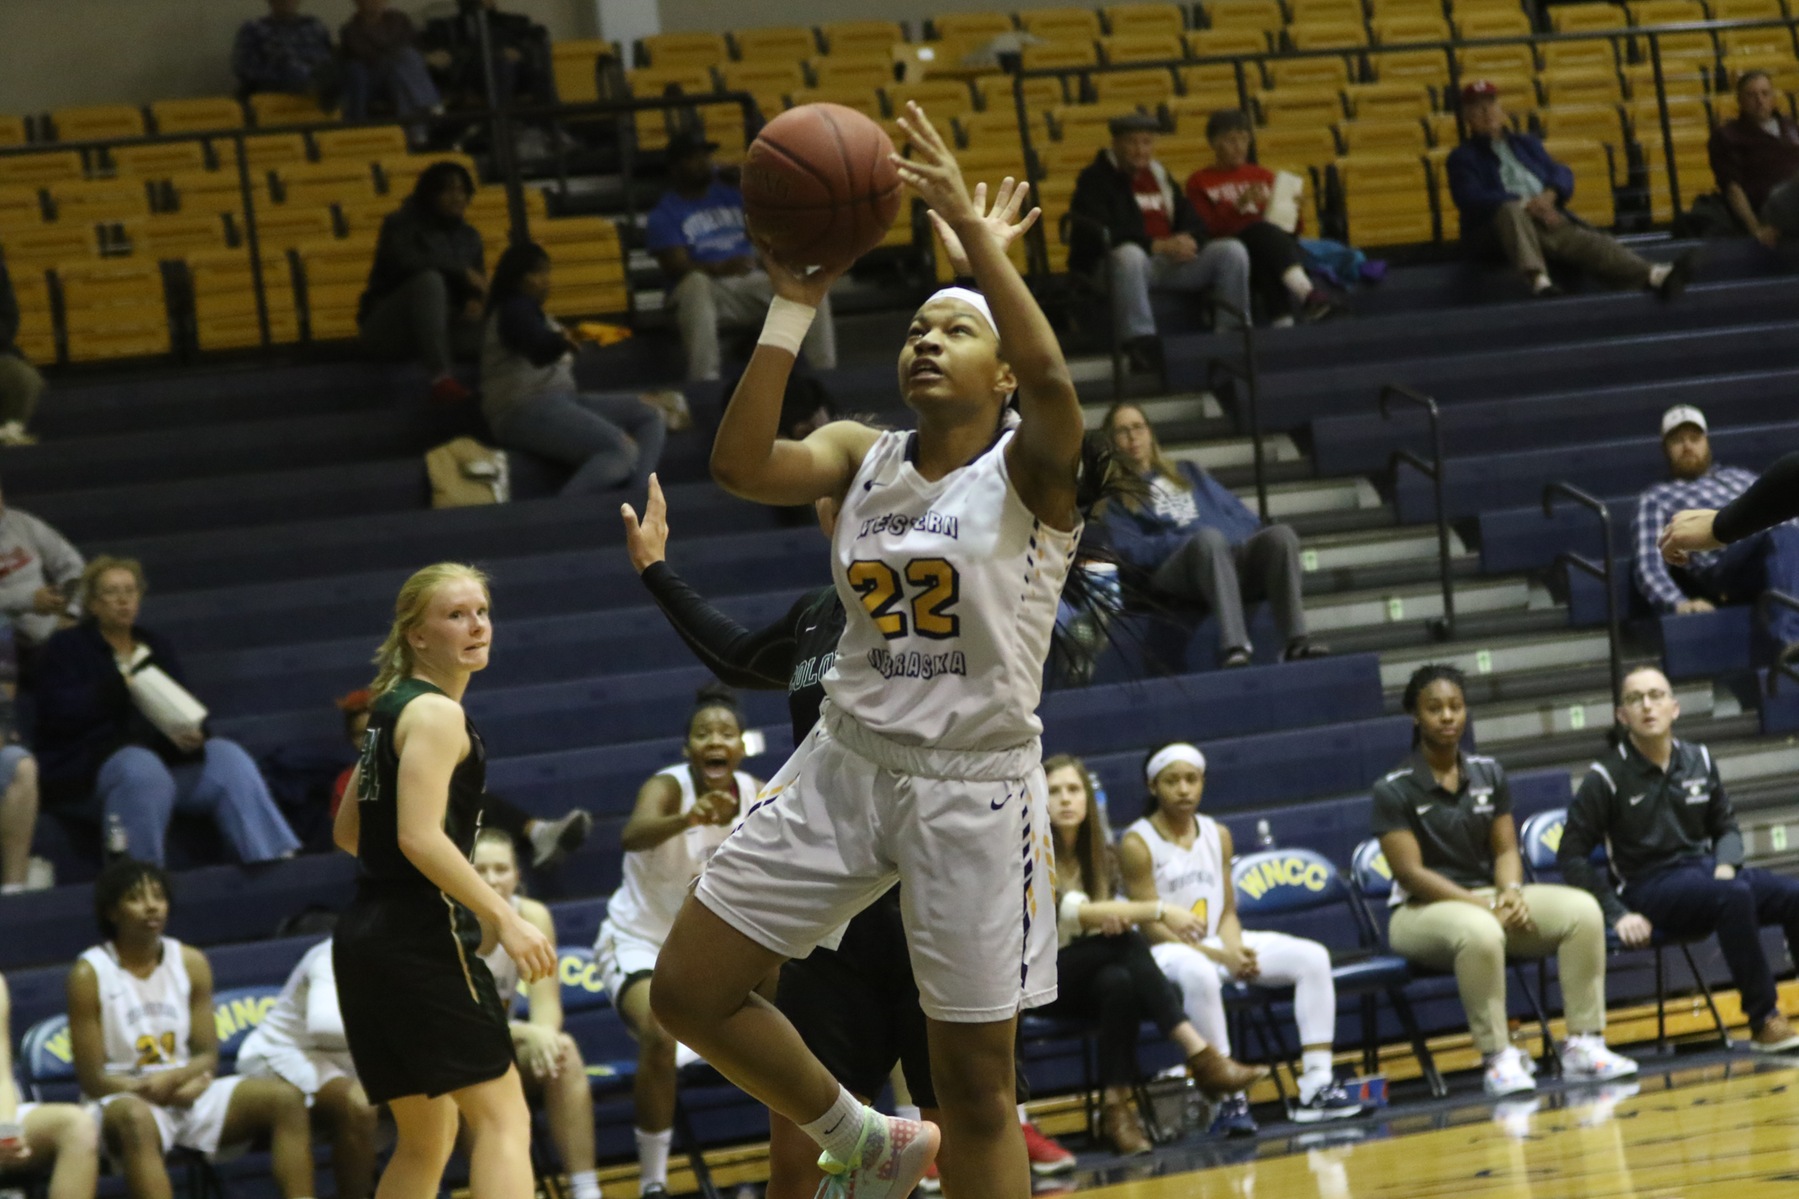 WNCC captures fifth win of season